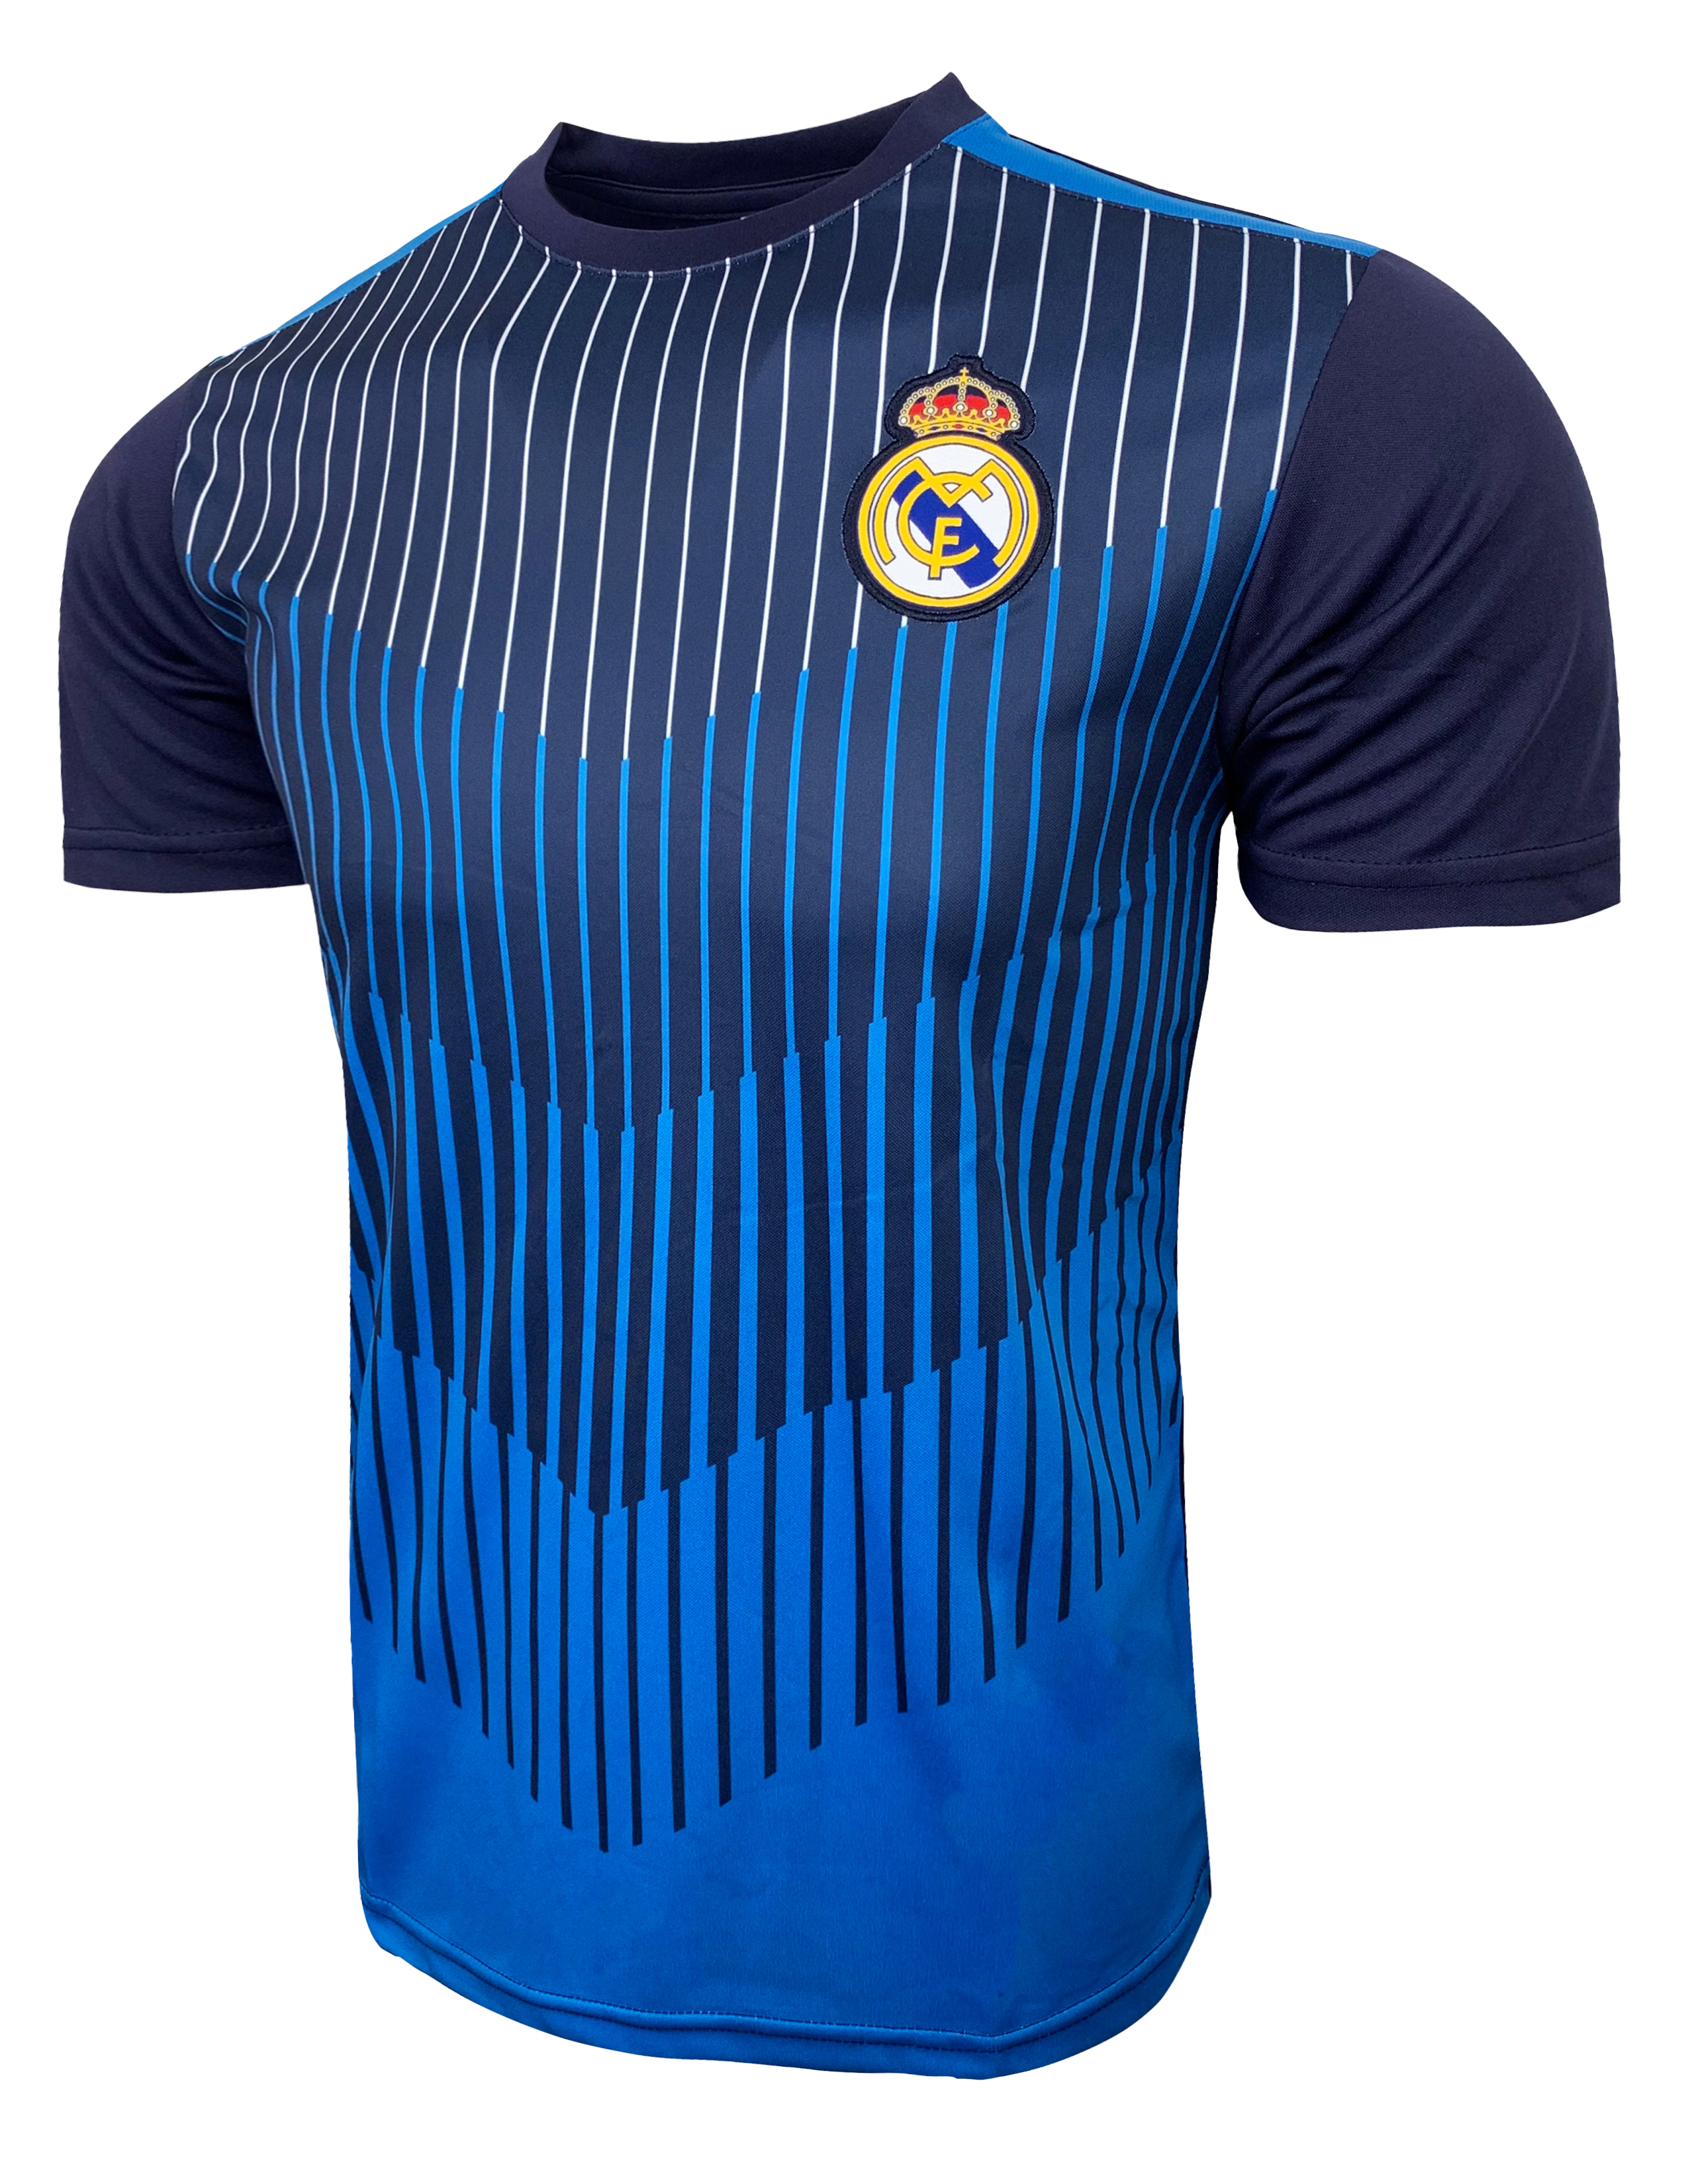 Real Madrid Training Jersey, Adult and Youth Sizes, Licensed Real Madrid Shirt (L) - image 1 of 4